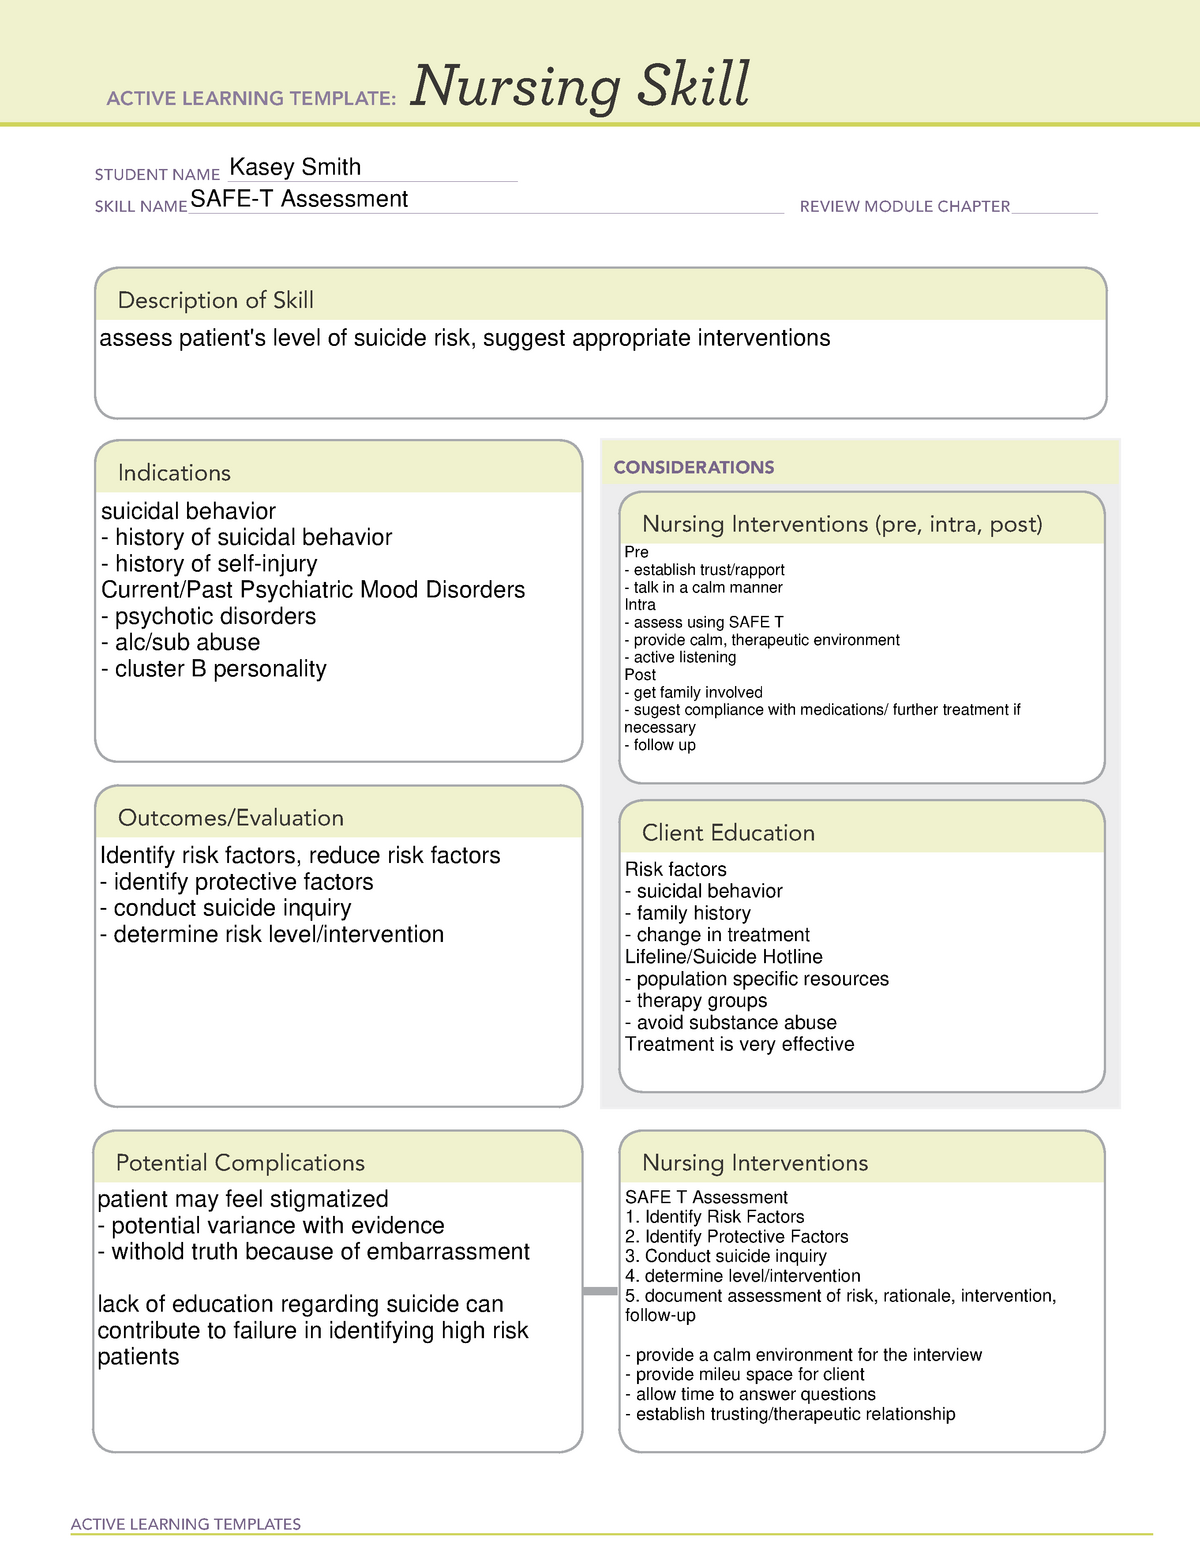 Client Safety Nursing Skill Template